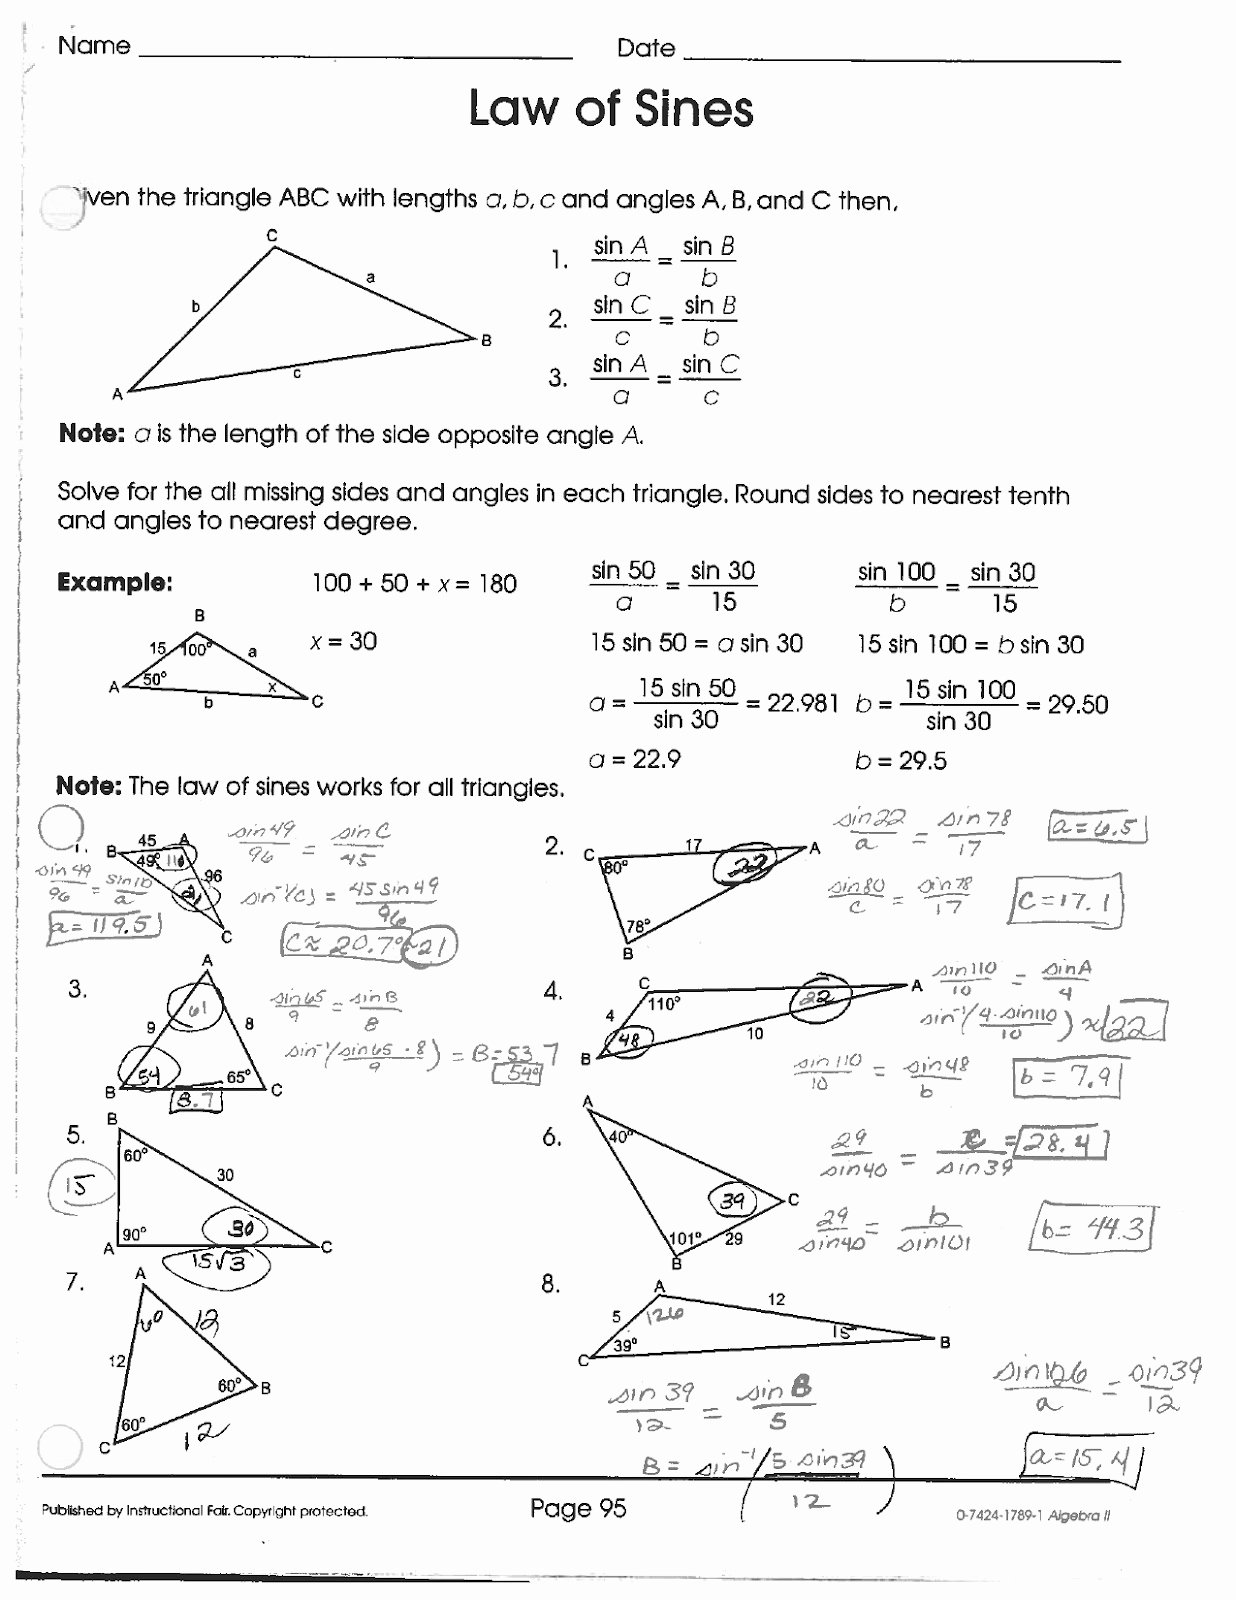 Law Of Cosines Worksheet Unique Math Classes Spring 2012 Pre Calc Laws Of Sines and